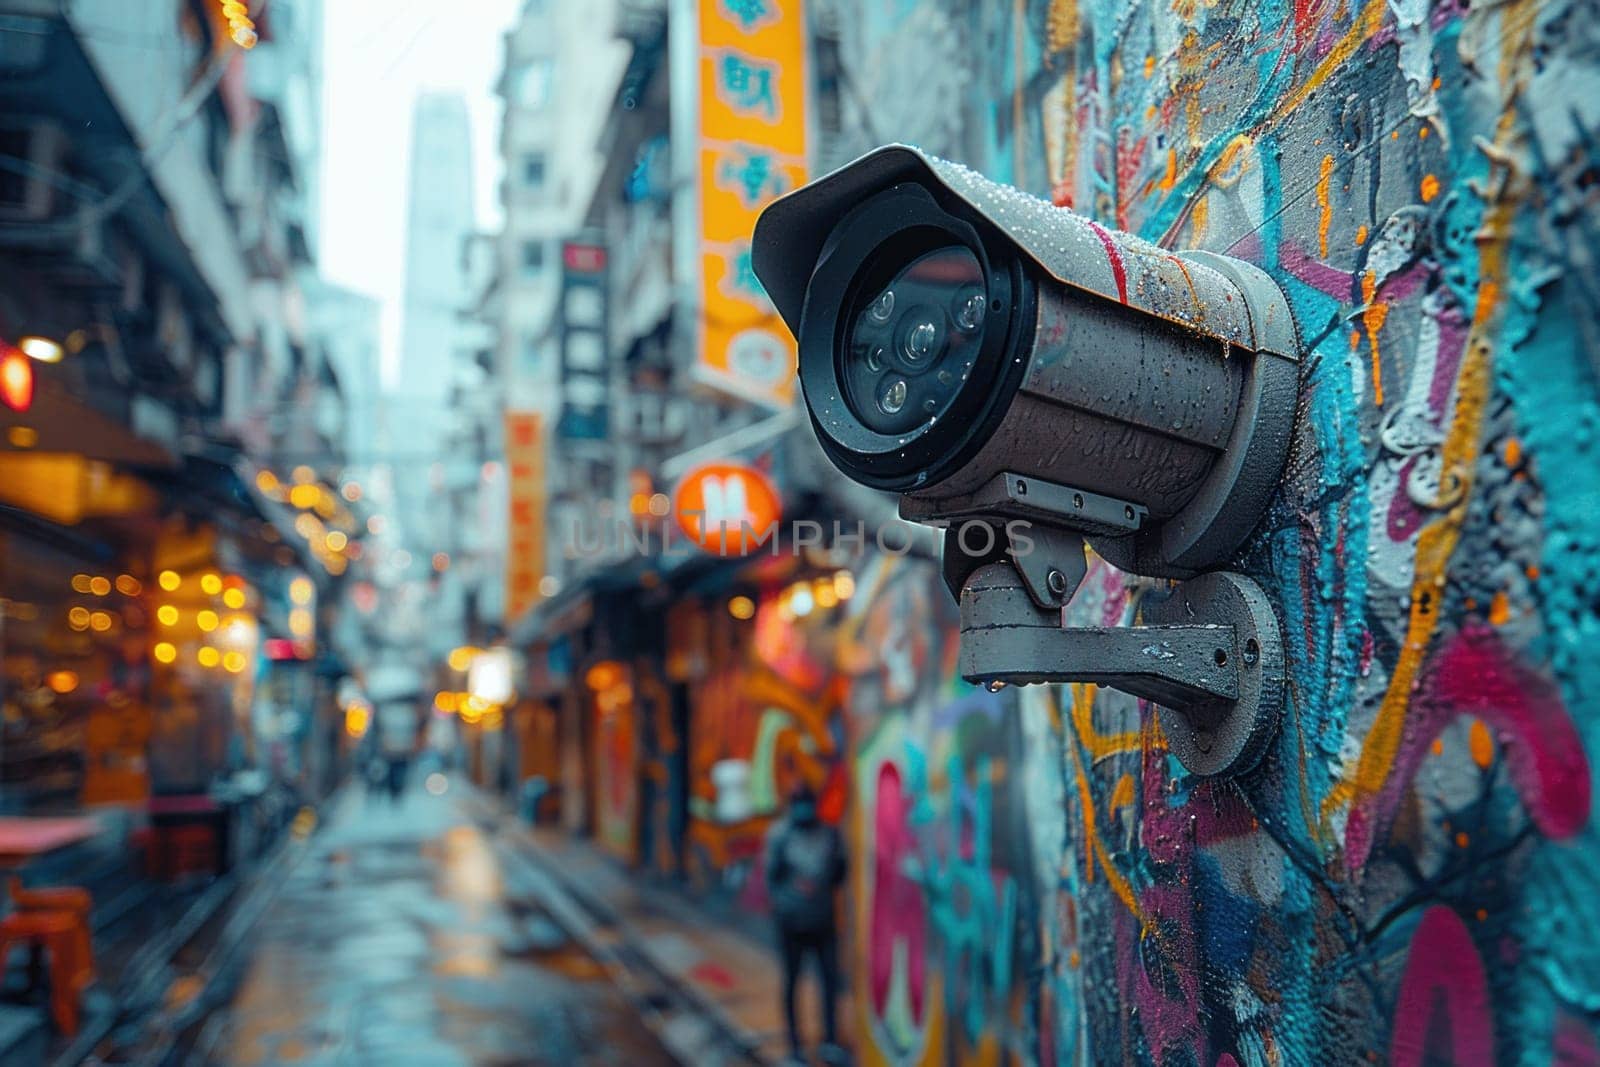 A street security camera monitoring activity on a city street, attached to a wall.